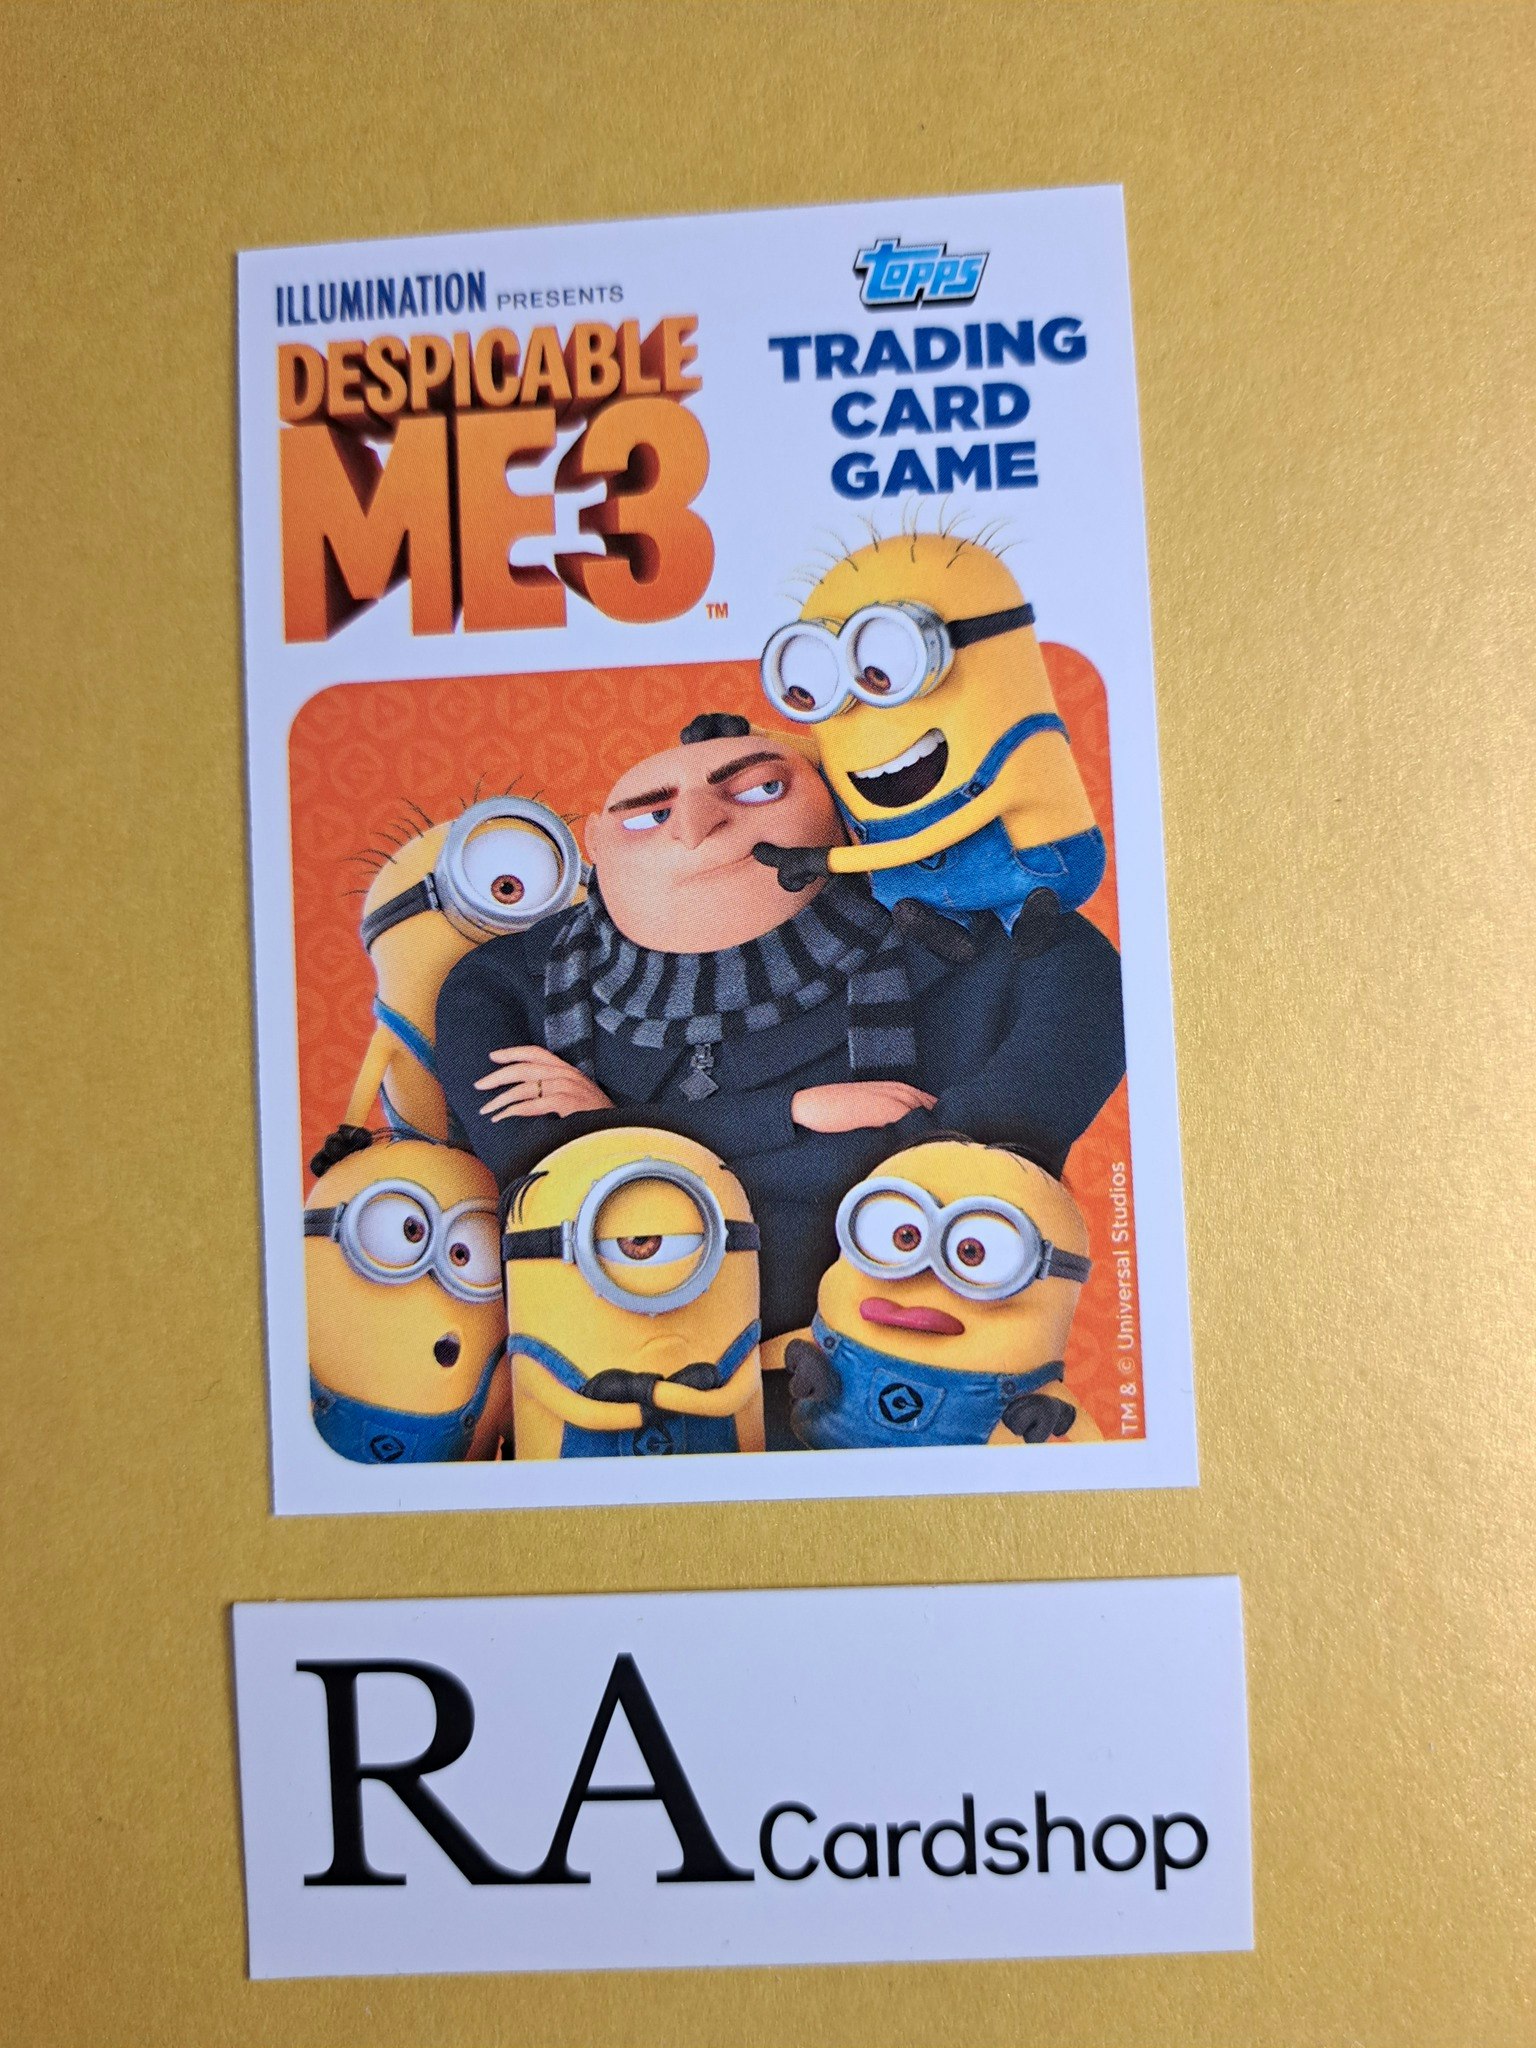 Mel & The Minions (1) #130 Despicable Me 3 Topps